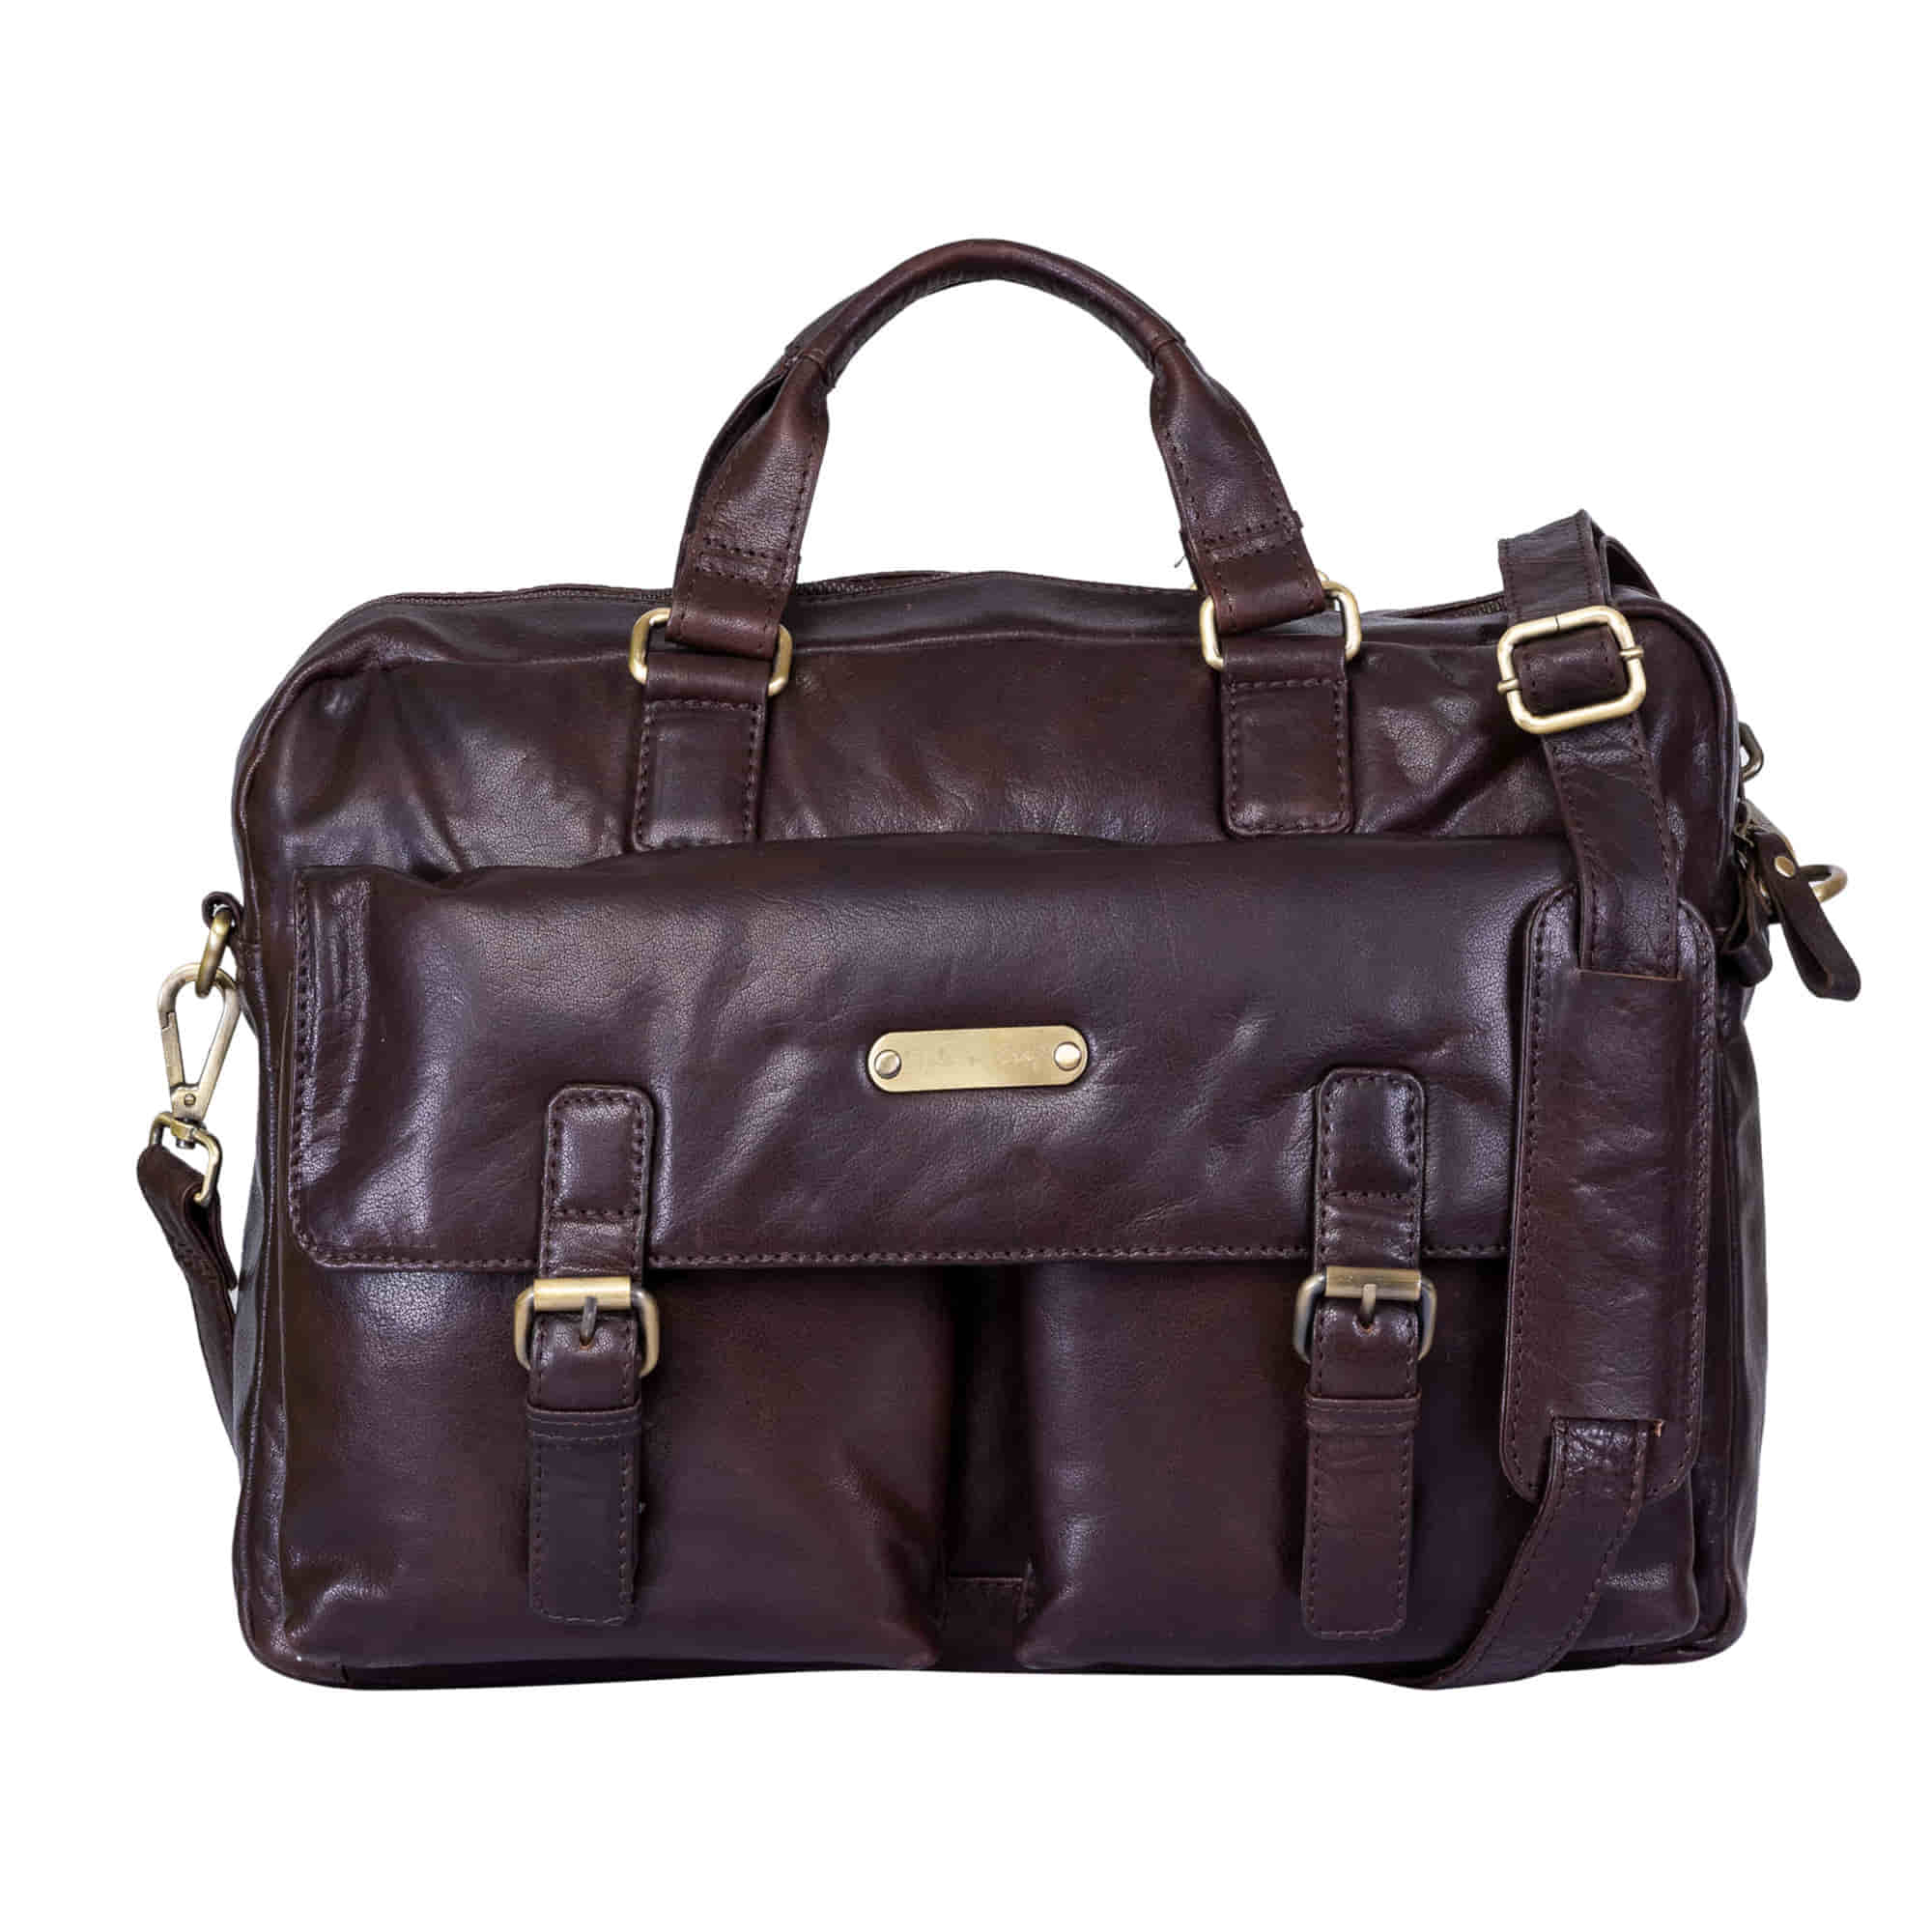 Women & Men's Leather Goods, Accessories and Tool Bags | Style n Craft